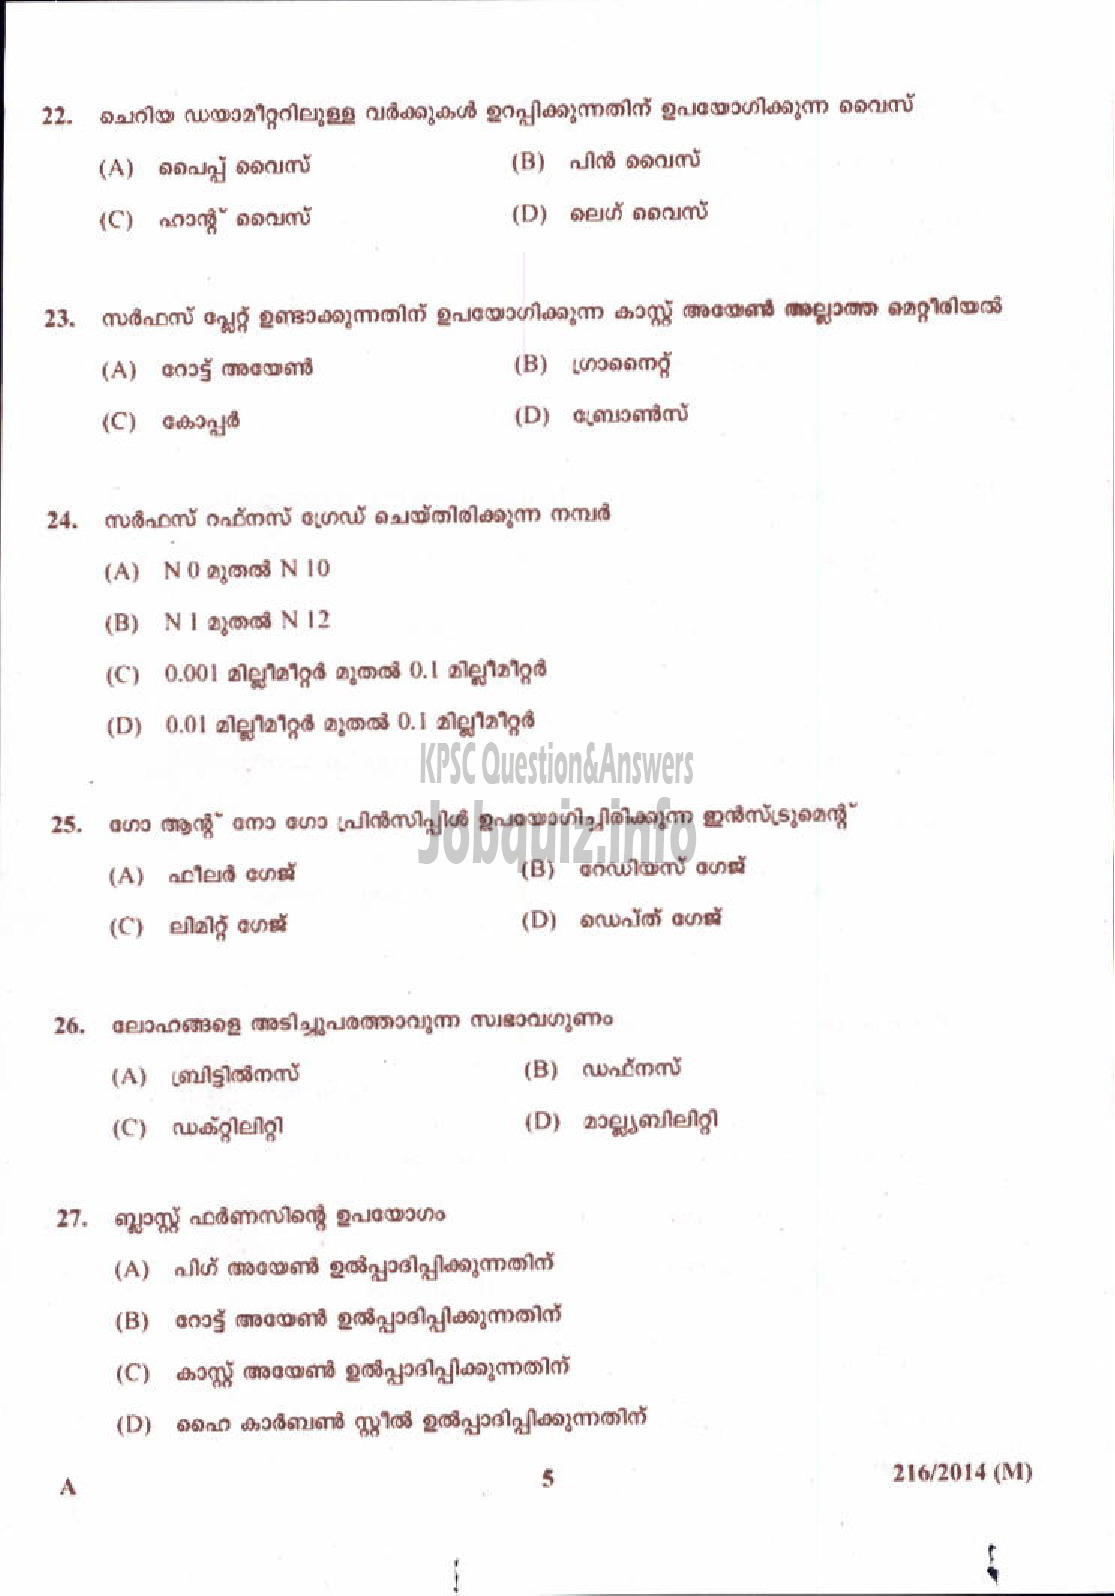 Kerala PSC Question Paper - FITTER AGRICULTURE-5